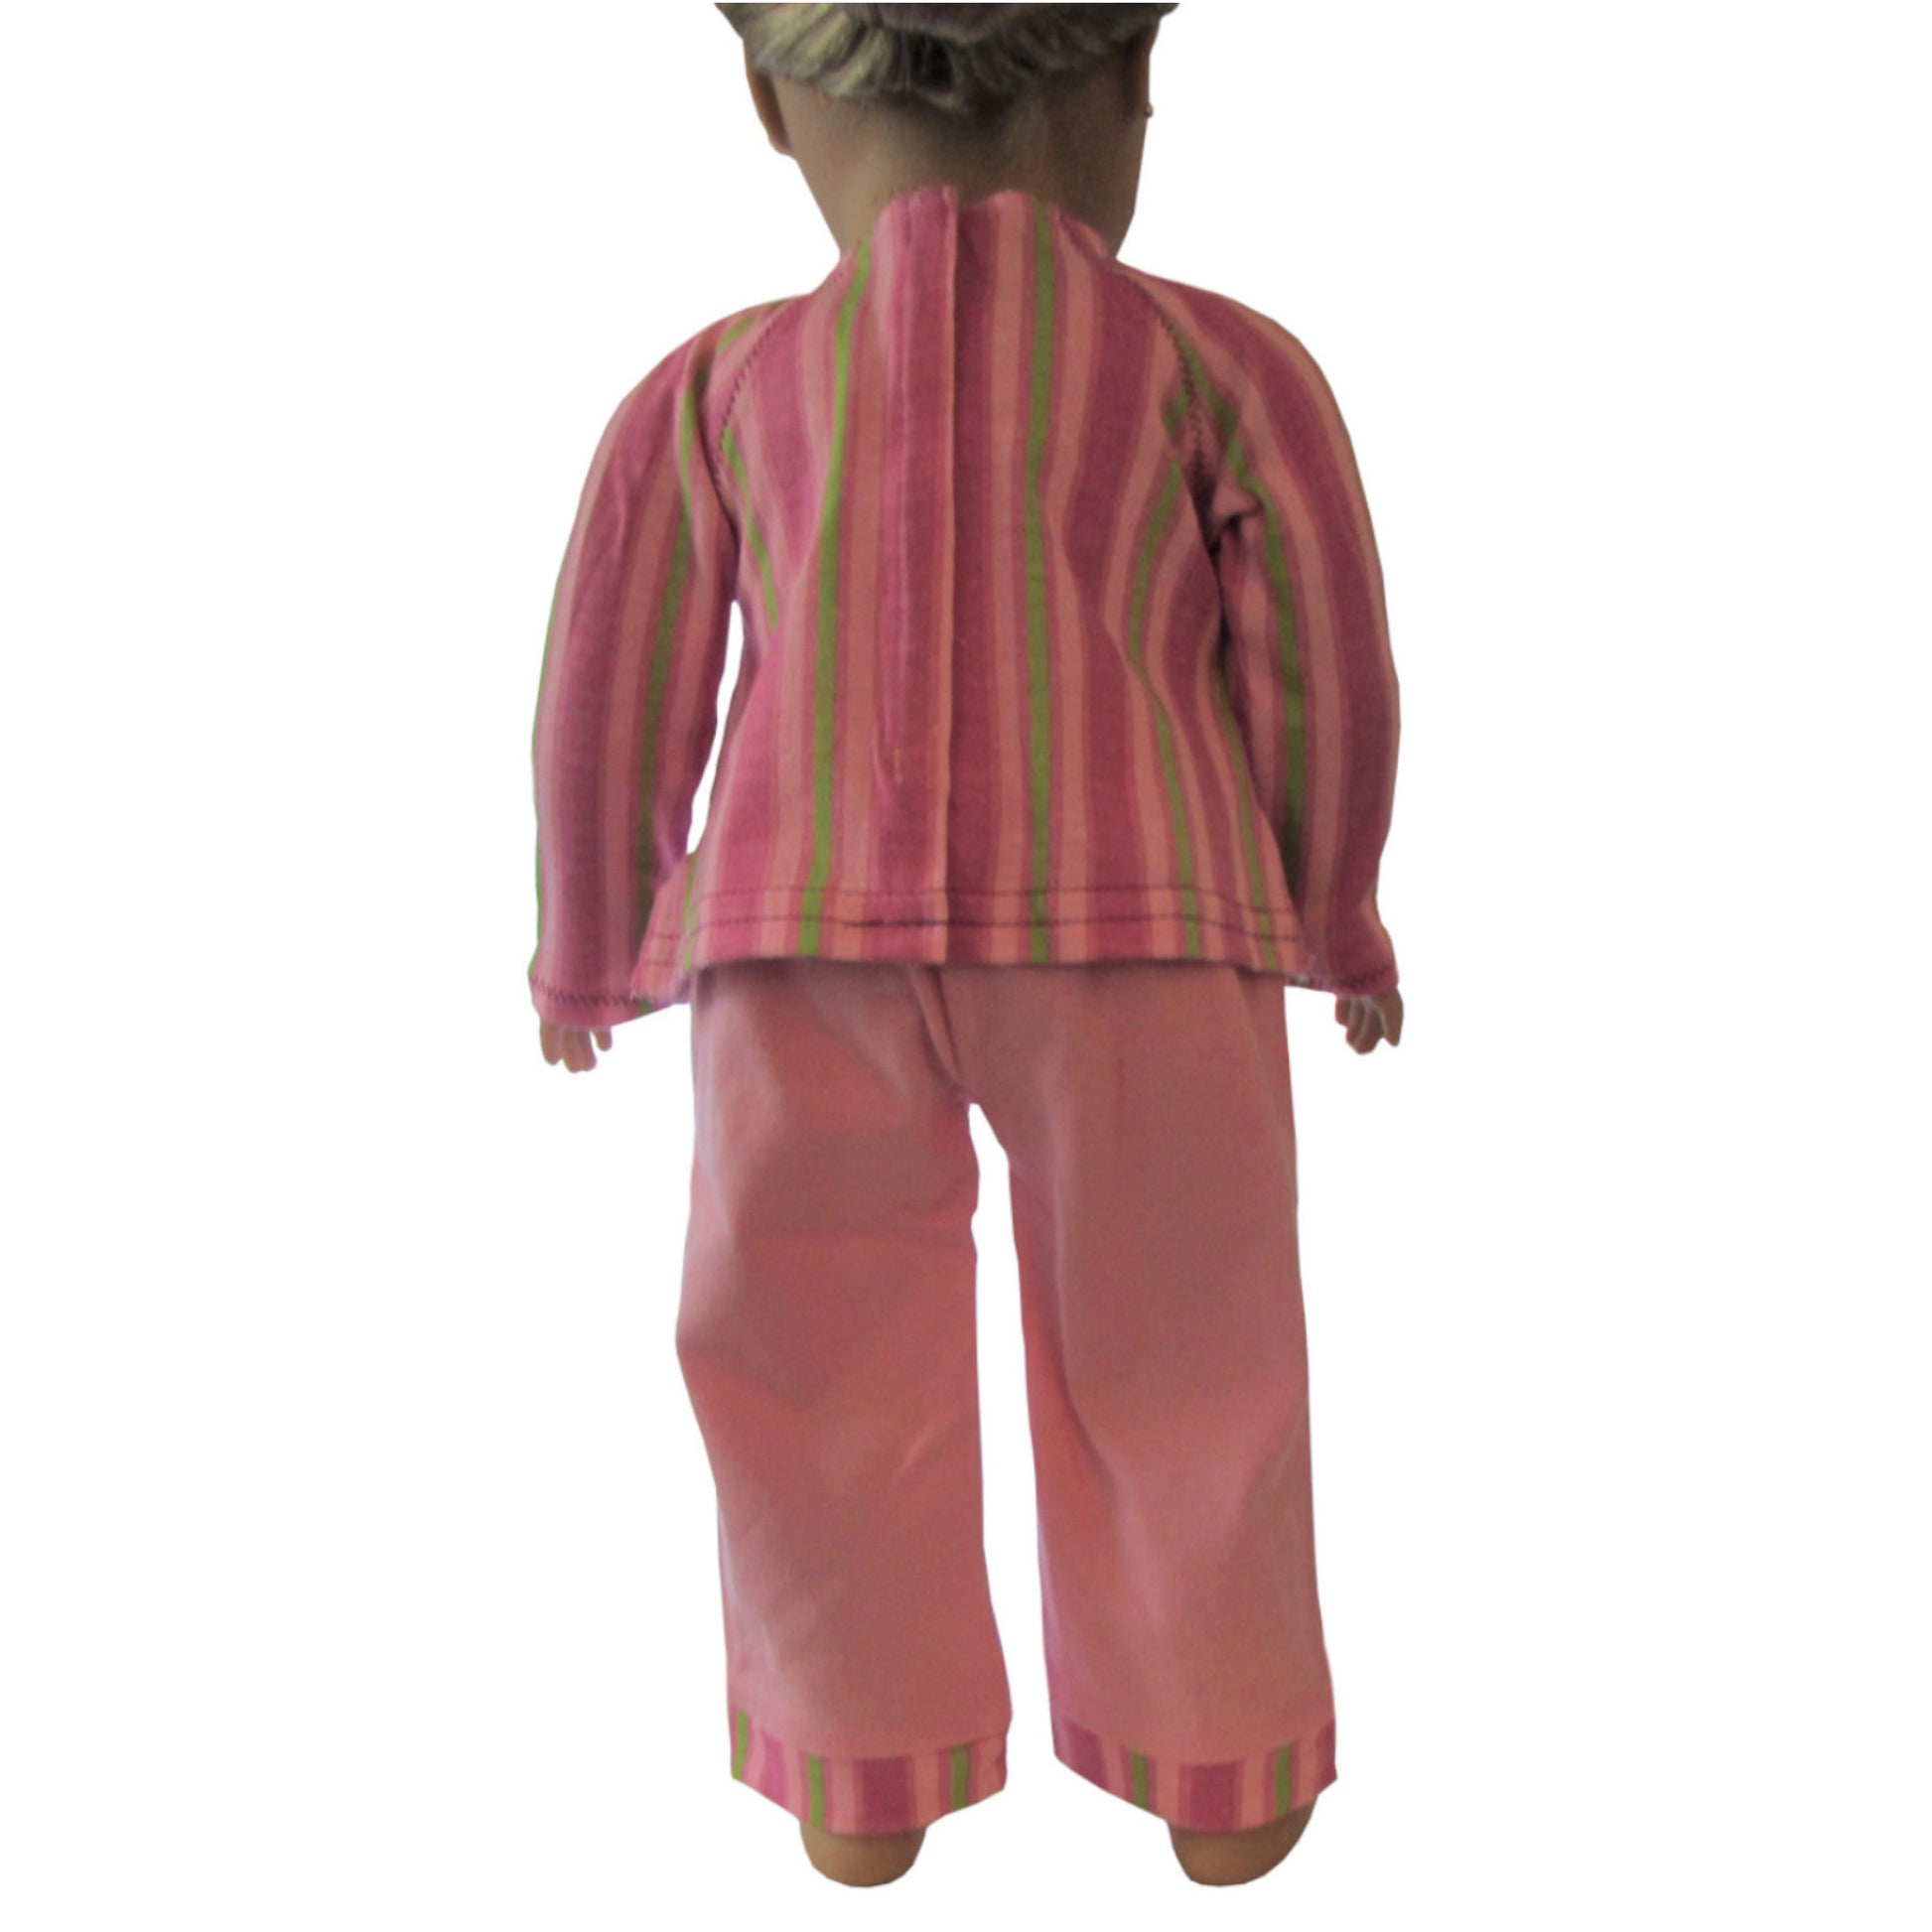 Pink Pastel Striped Top and Pink Pants for 18-inch dolls Back view